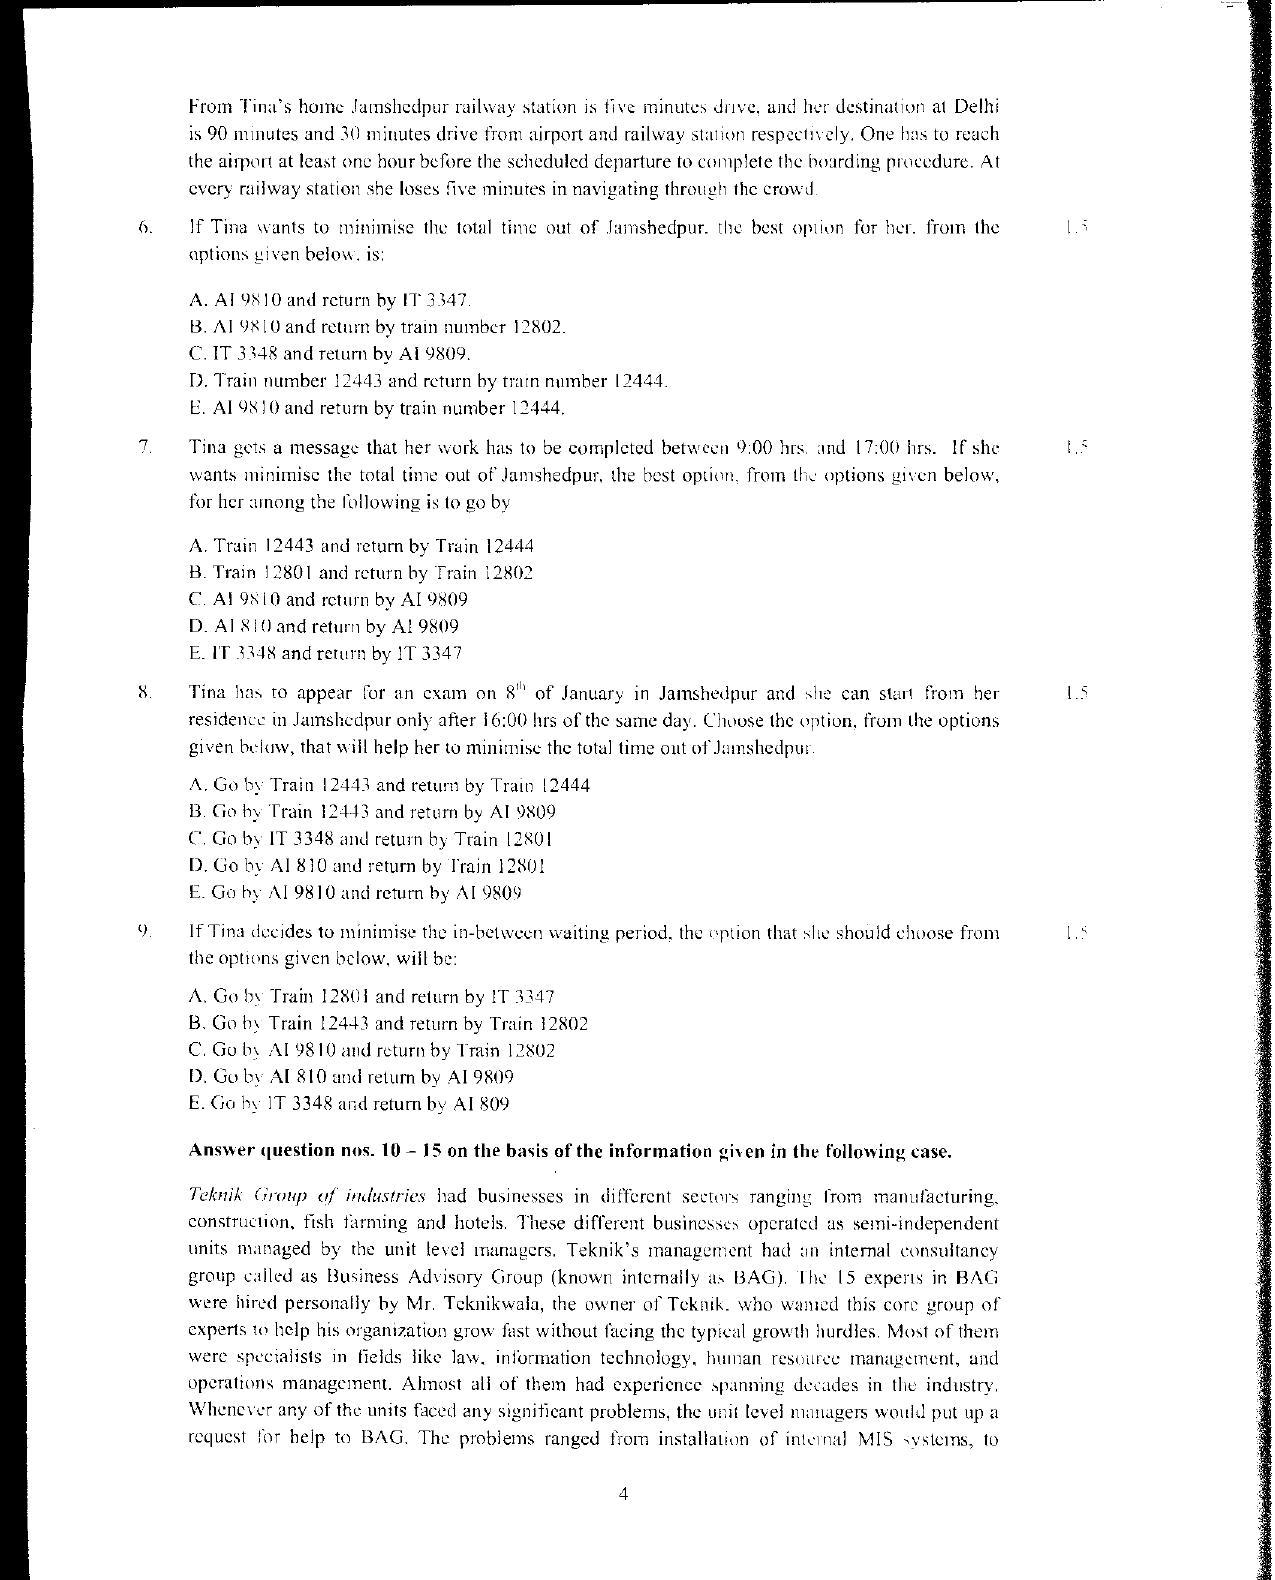 XAT 2012 Question Papers - Page 5